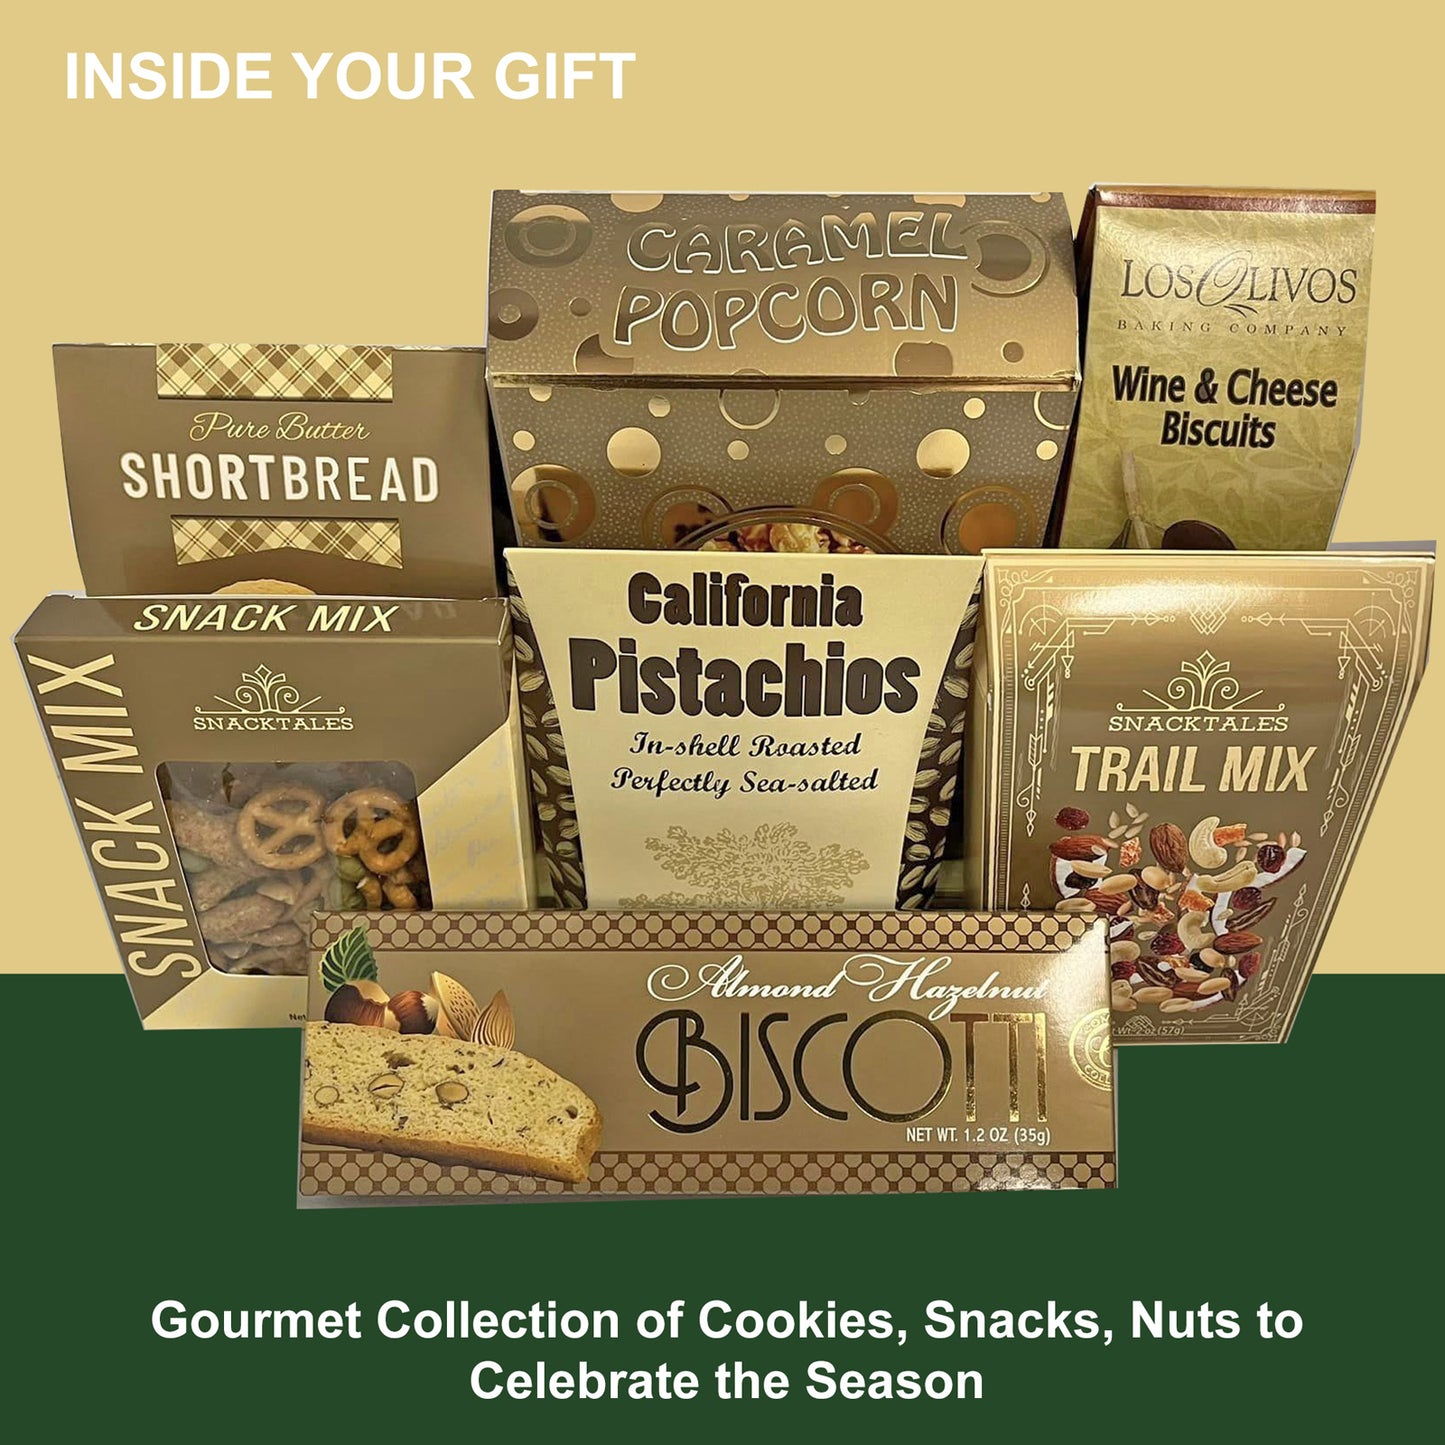 Silver and Gold Holiday Gift Basket for Christmas Gourmet Gift for Individuals or Couples